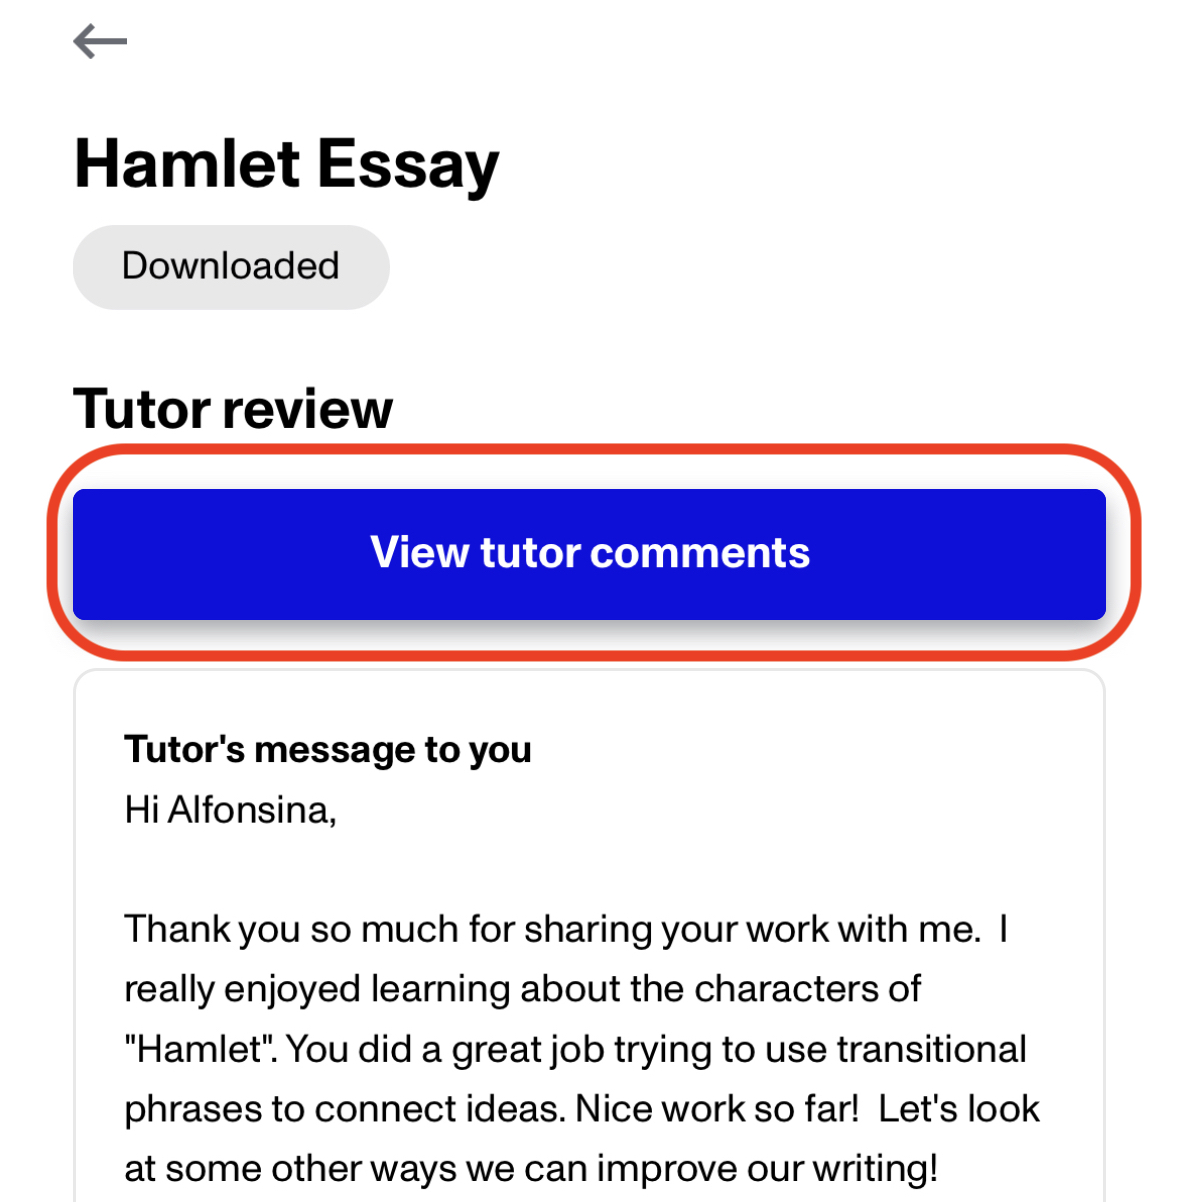 Paper_mmobile_View_tutor_comments.jpeg